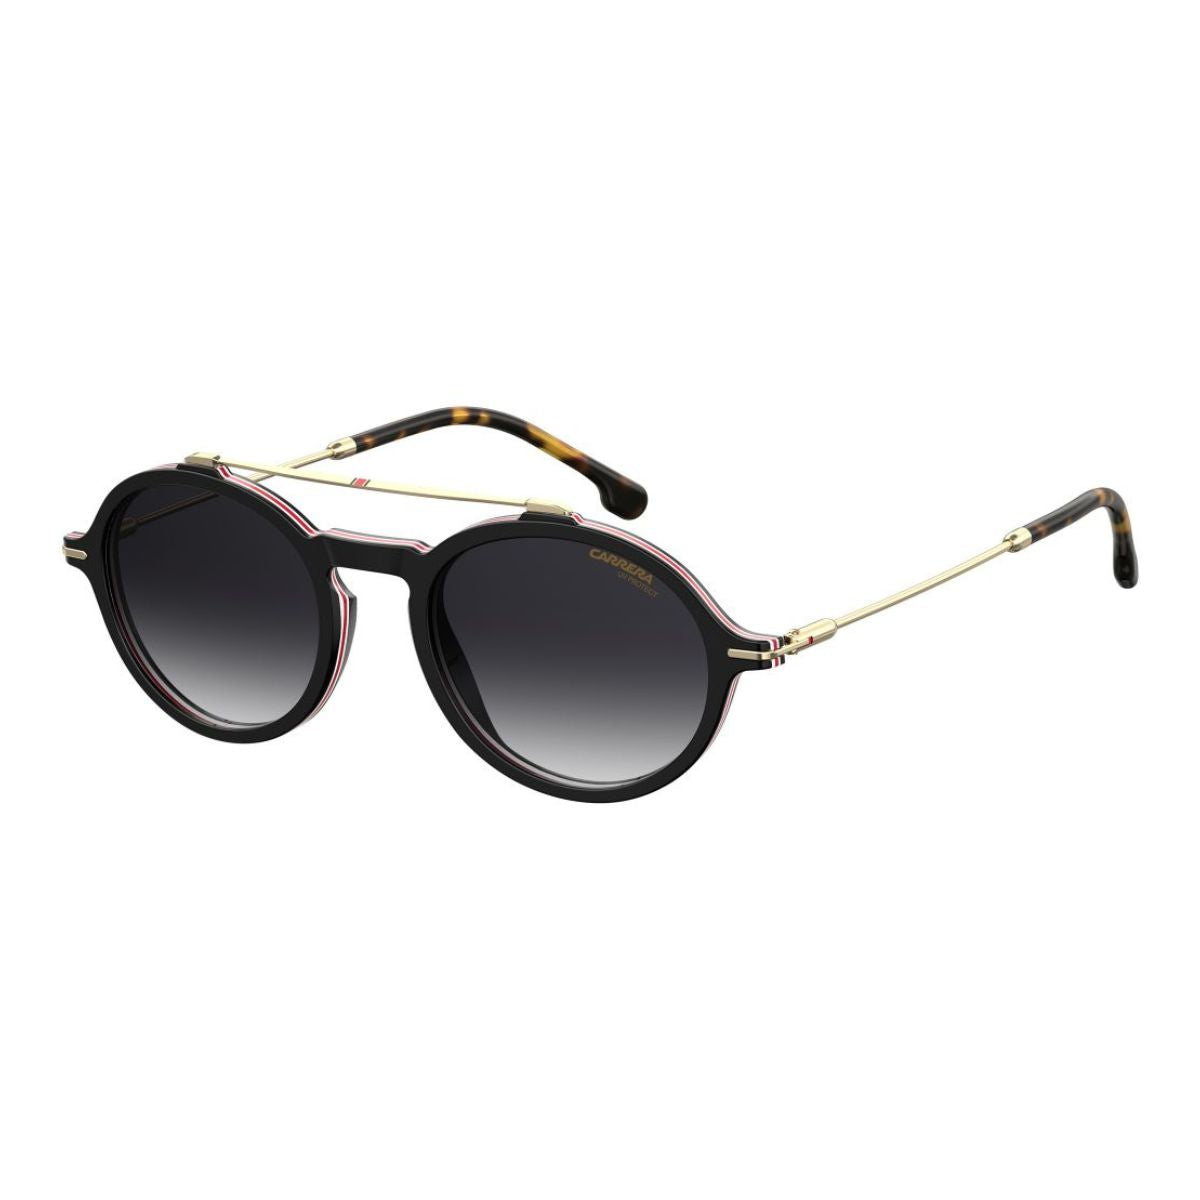 "Buy Stylish Rounded Carrera Sunglasses For Mens At Optorium"